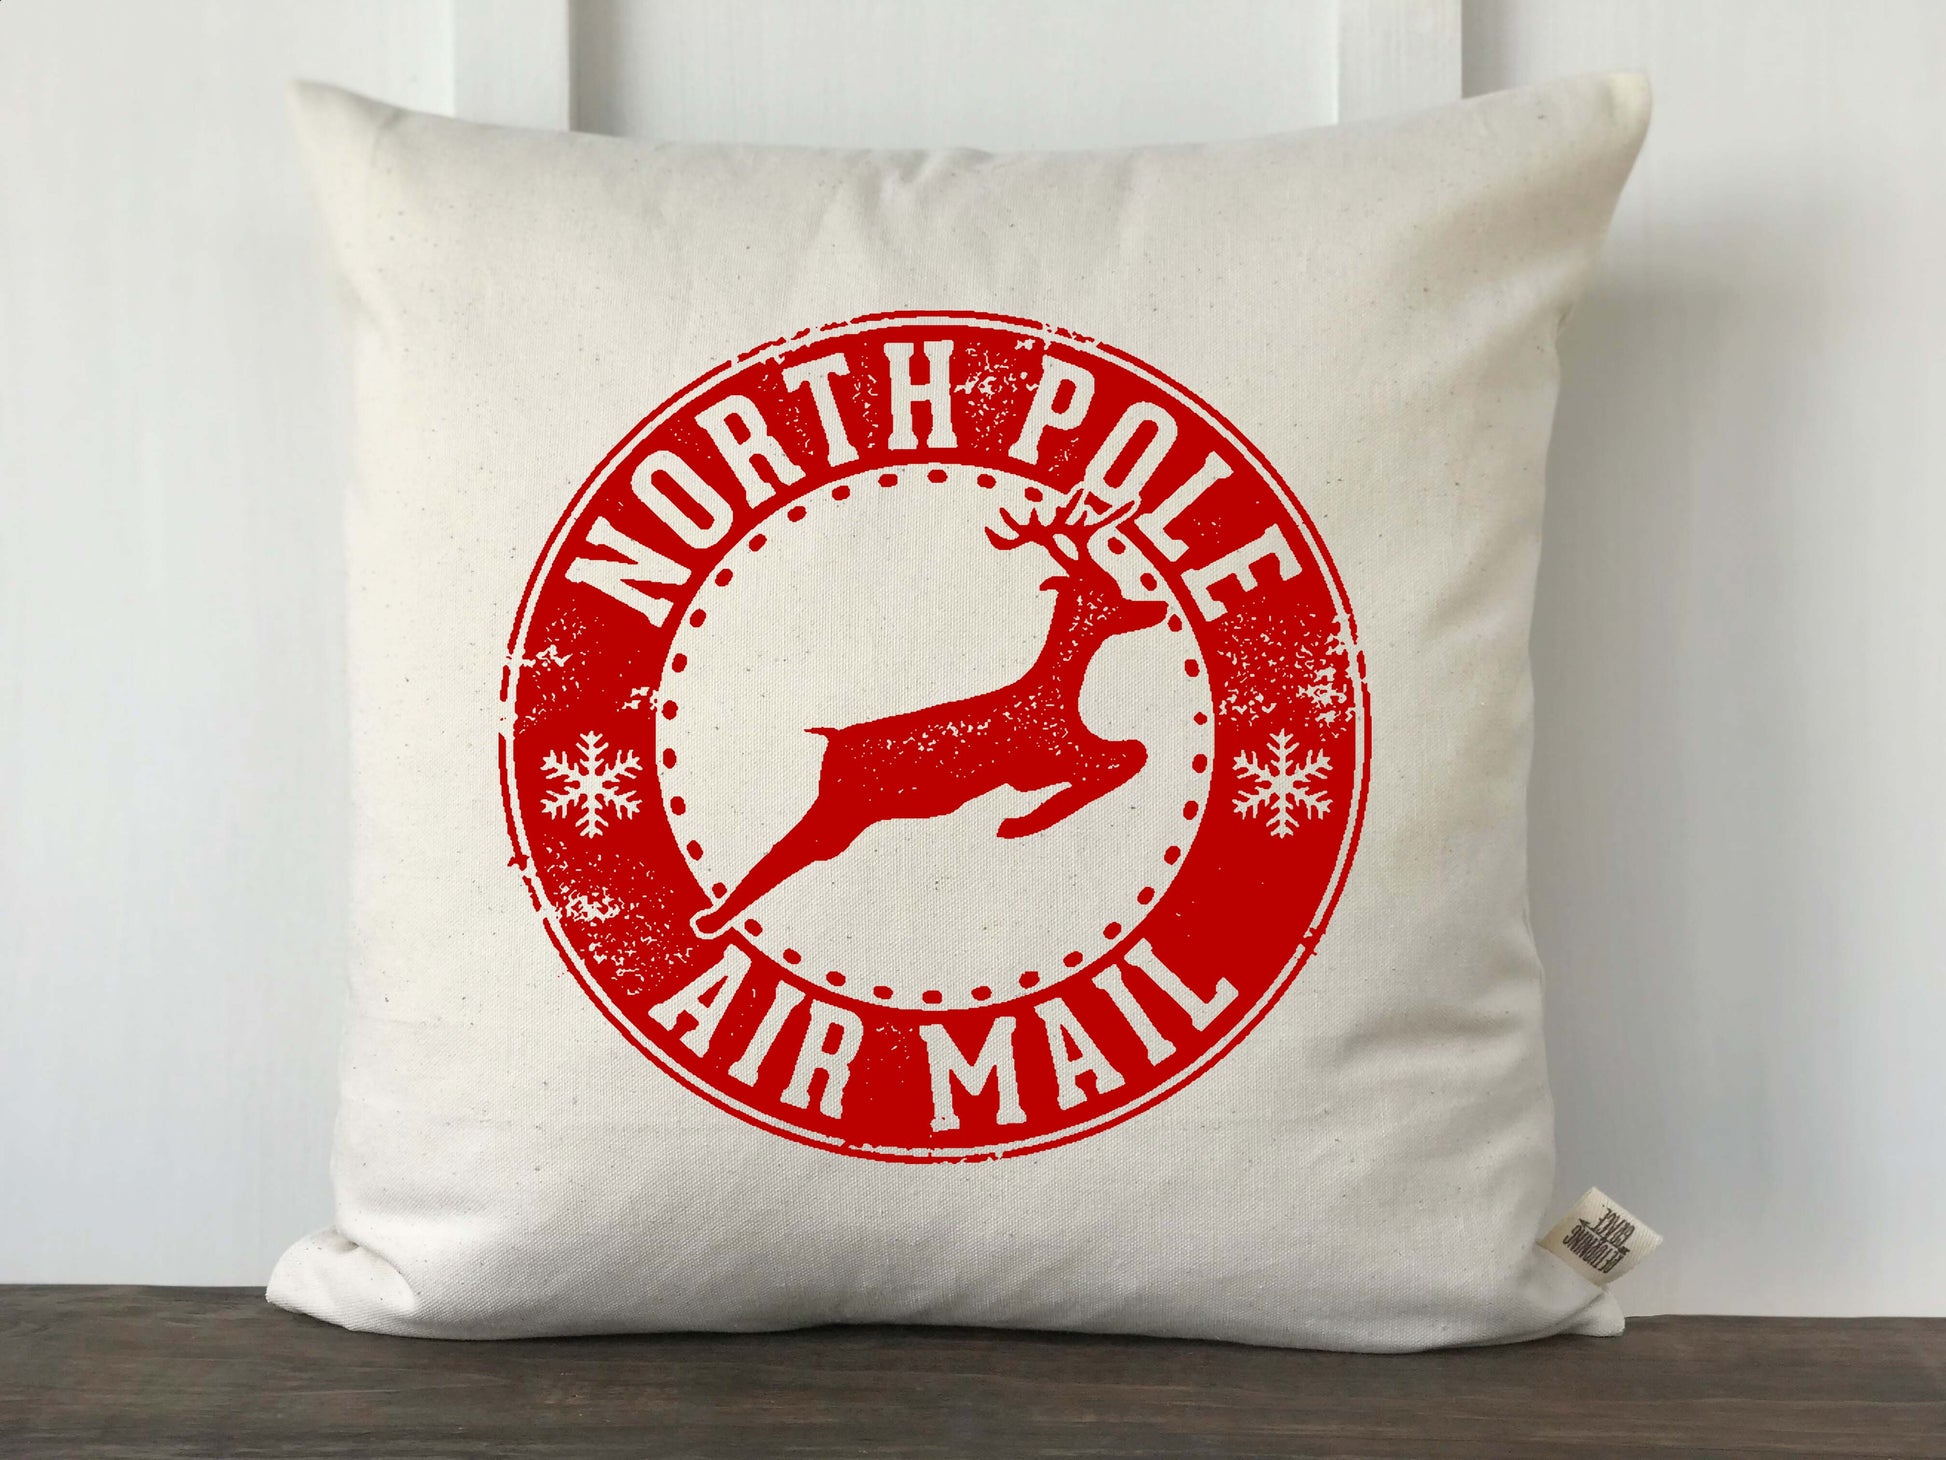 North Pole Air Mail Reindeer Postmark Christmas Pillow Cover - Returning Grace Designs